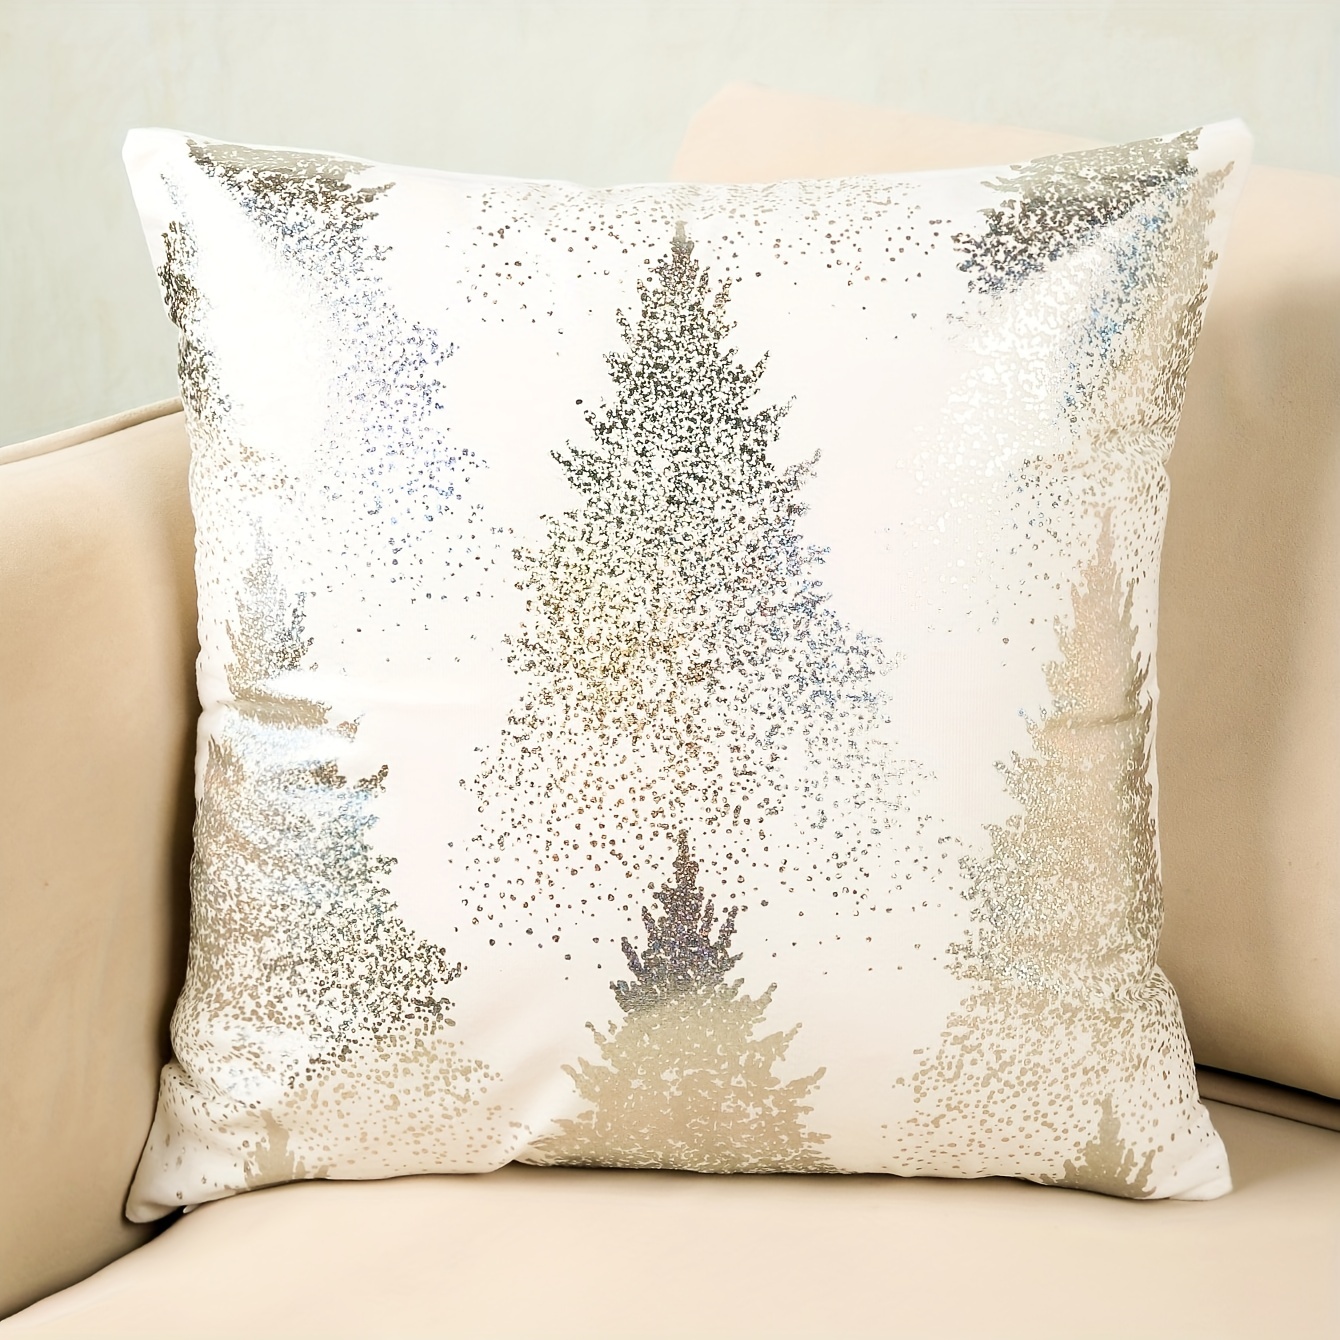 4pcs/set Christmas Pillow Covers 17.7inch*17.7inch, Christmas Deer Forest  Snowflake Bear Blue Christmas Pillow Covers For Sofa Bed Car Decor Winter  Holiday Farmhouse Decoration, Outdoor/indoor Use, Pillow Inserts Not  Included